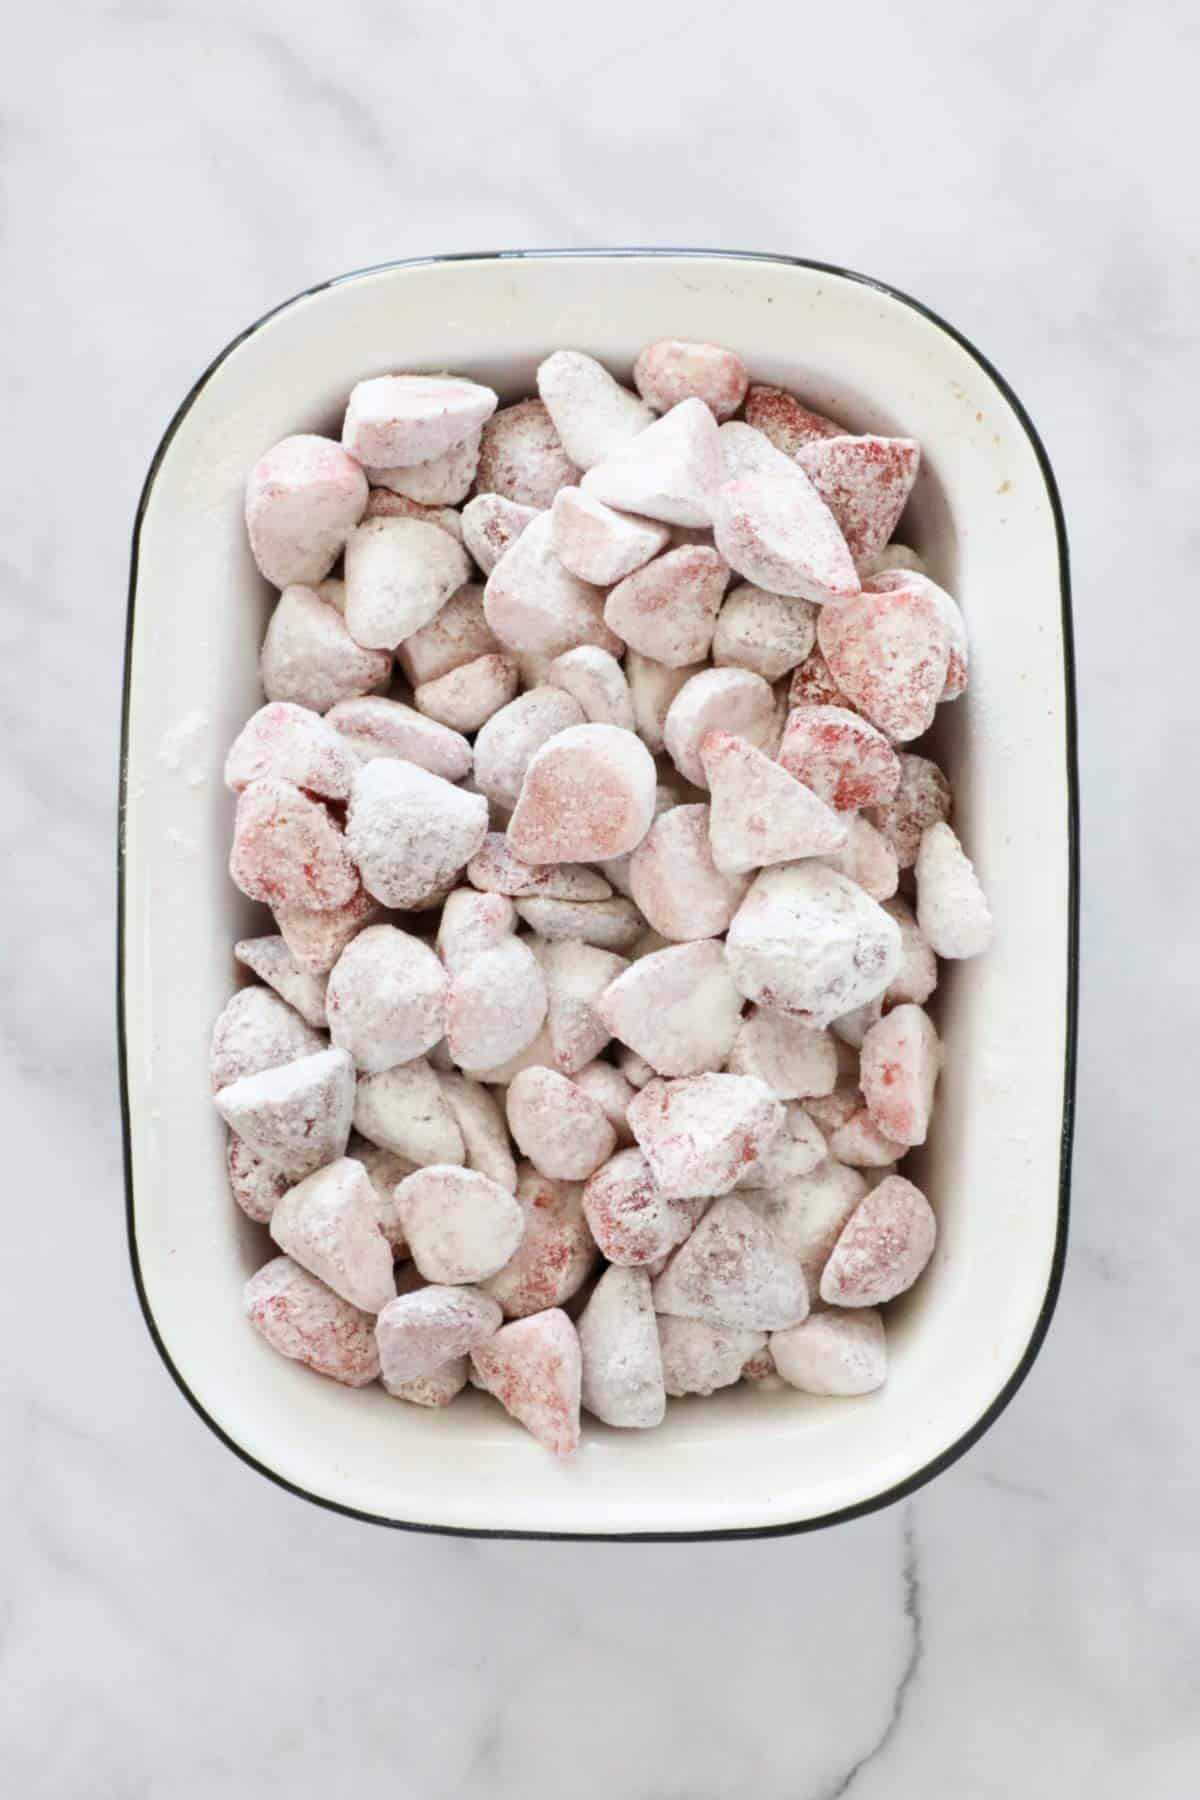 Strawberries coated with sugar and cornflour in a white baking dish.